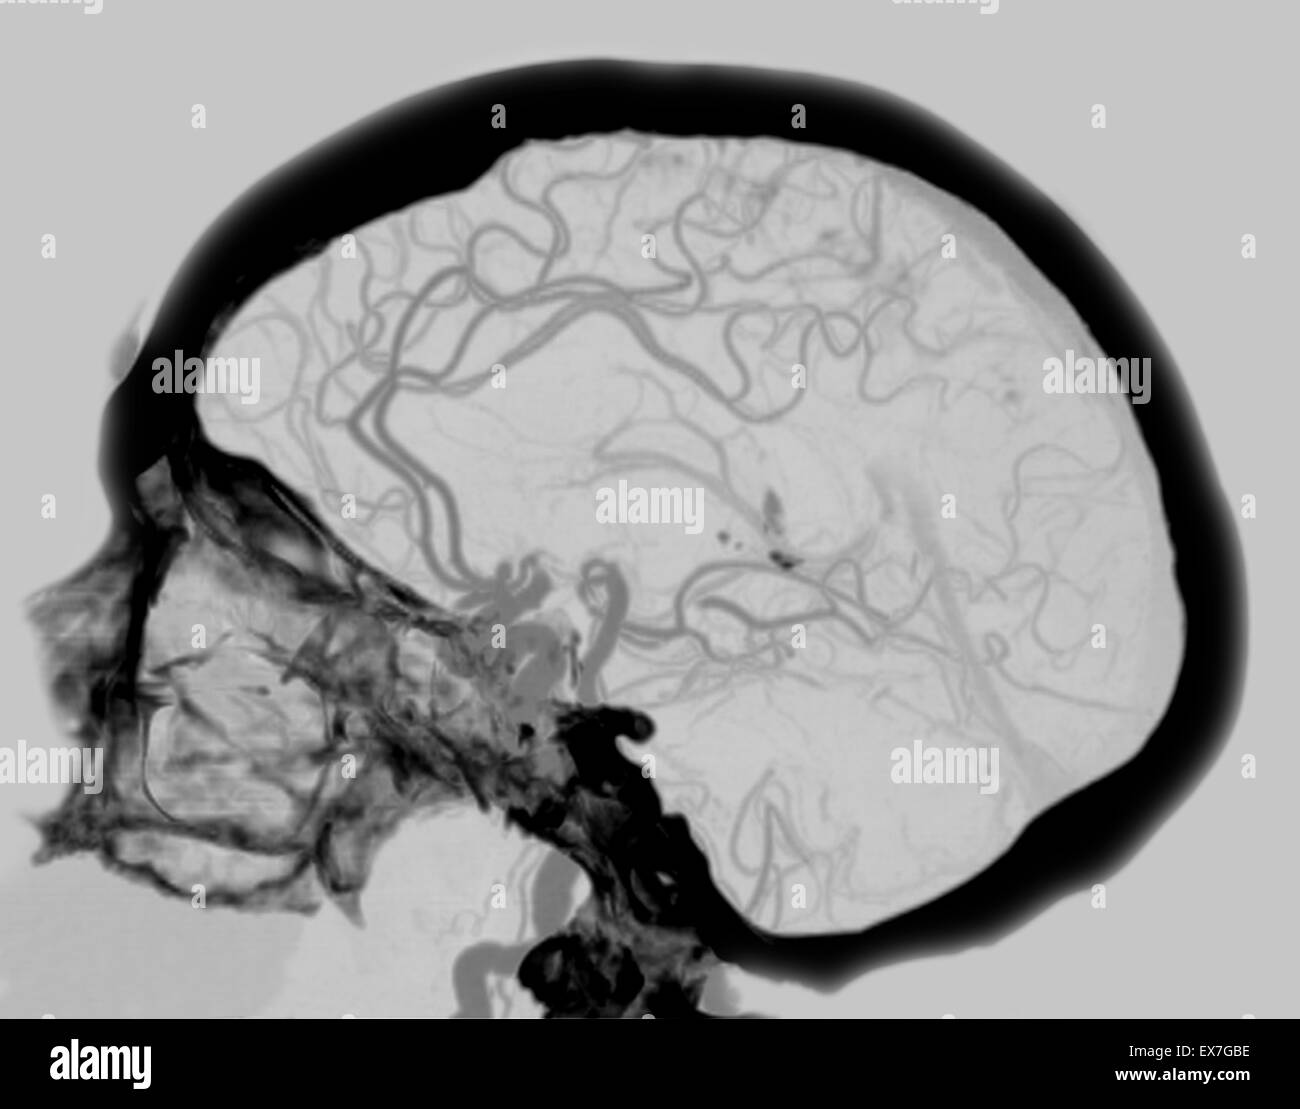 Angiogram CT showing the blood supply of the brain, including the Circle of Willis. Stock Photo